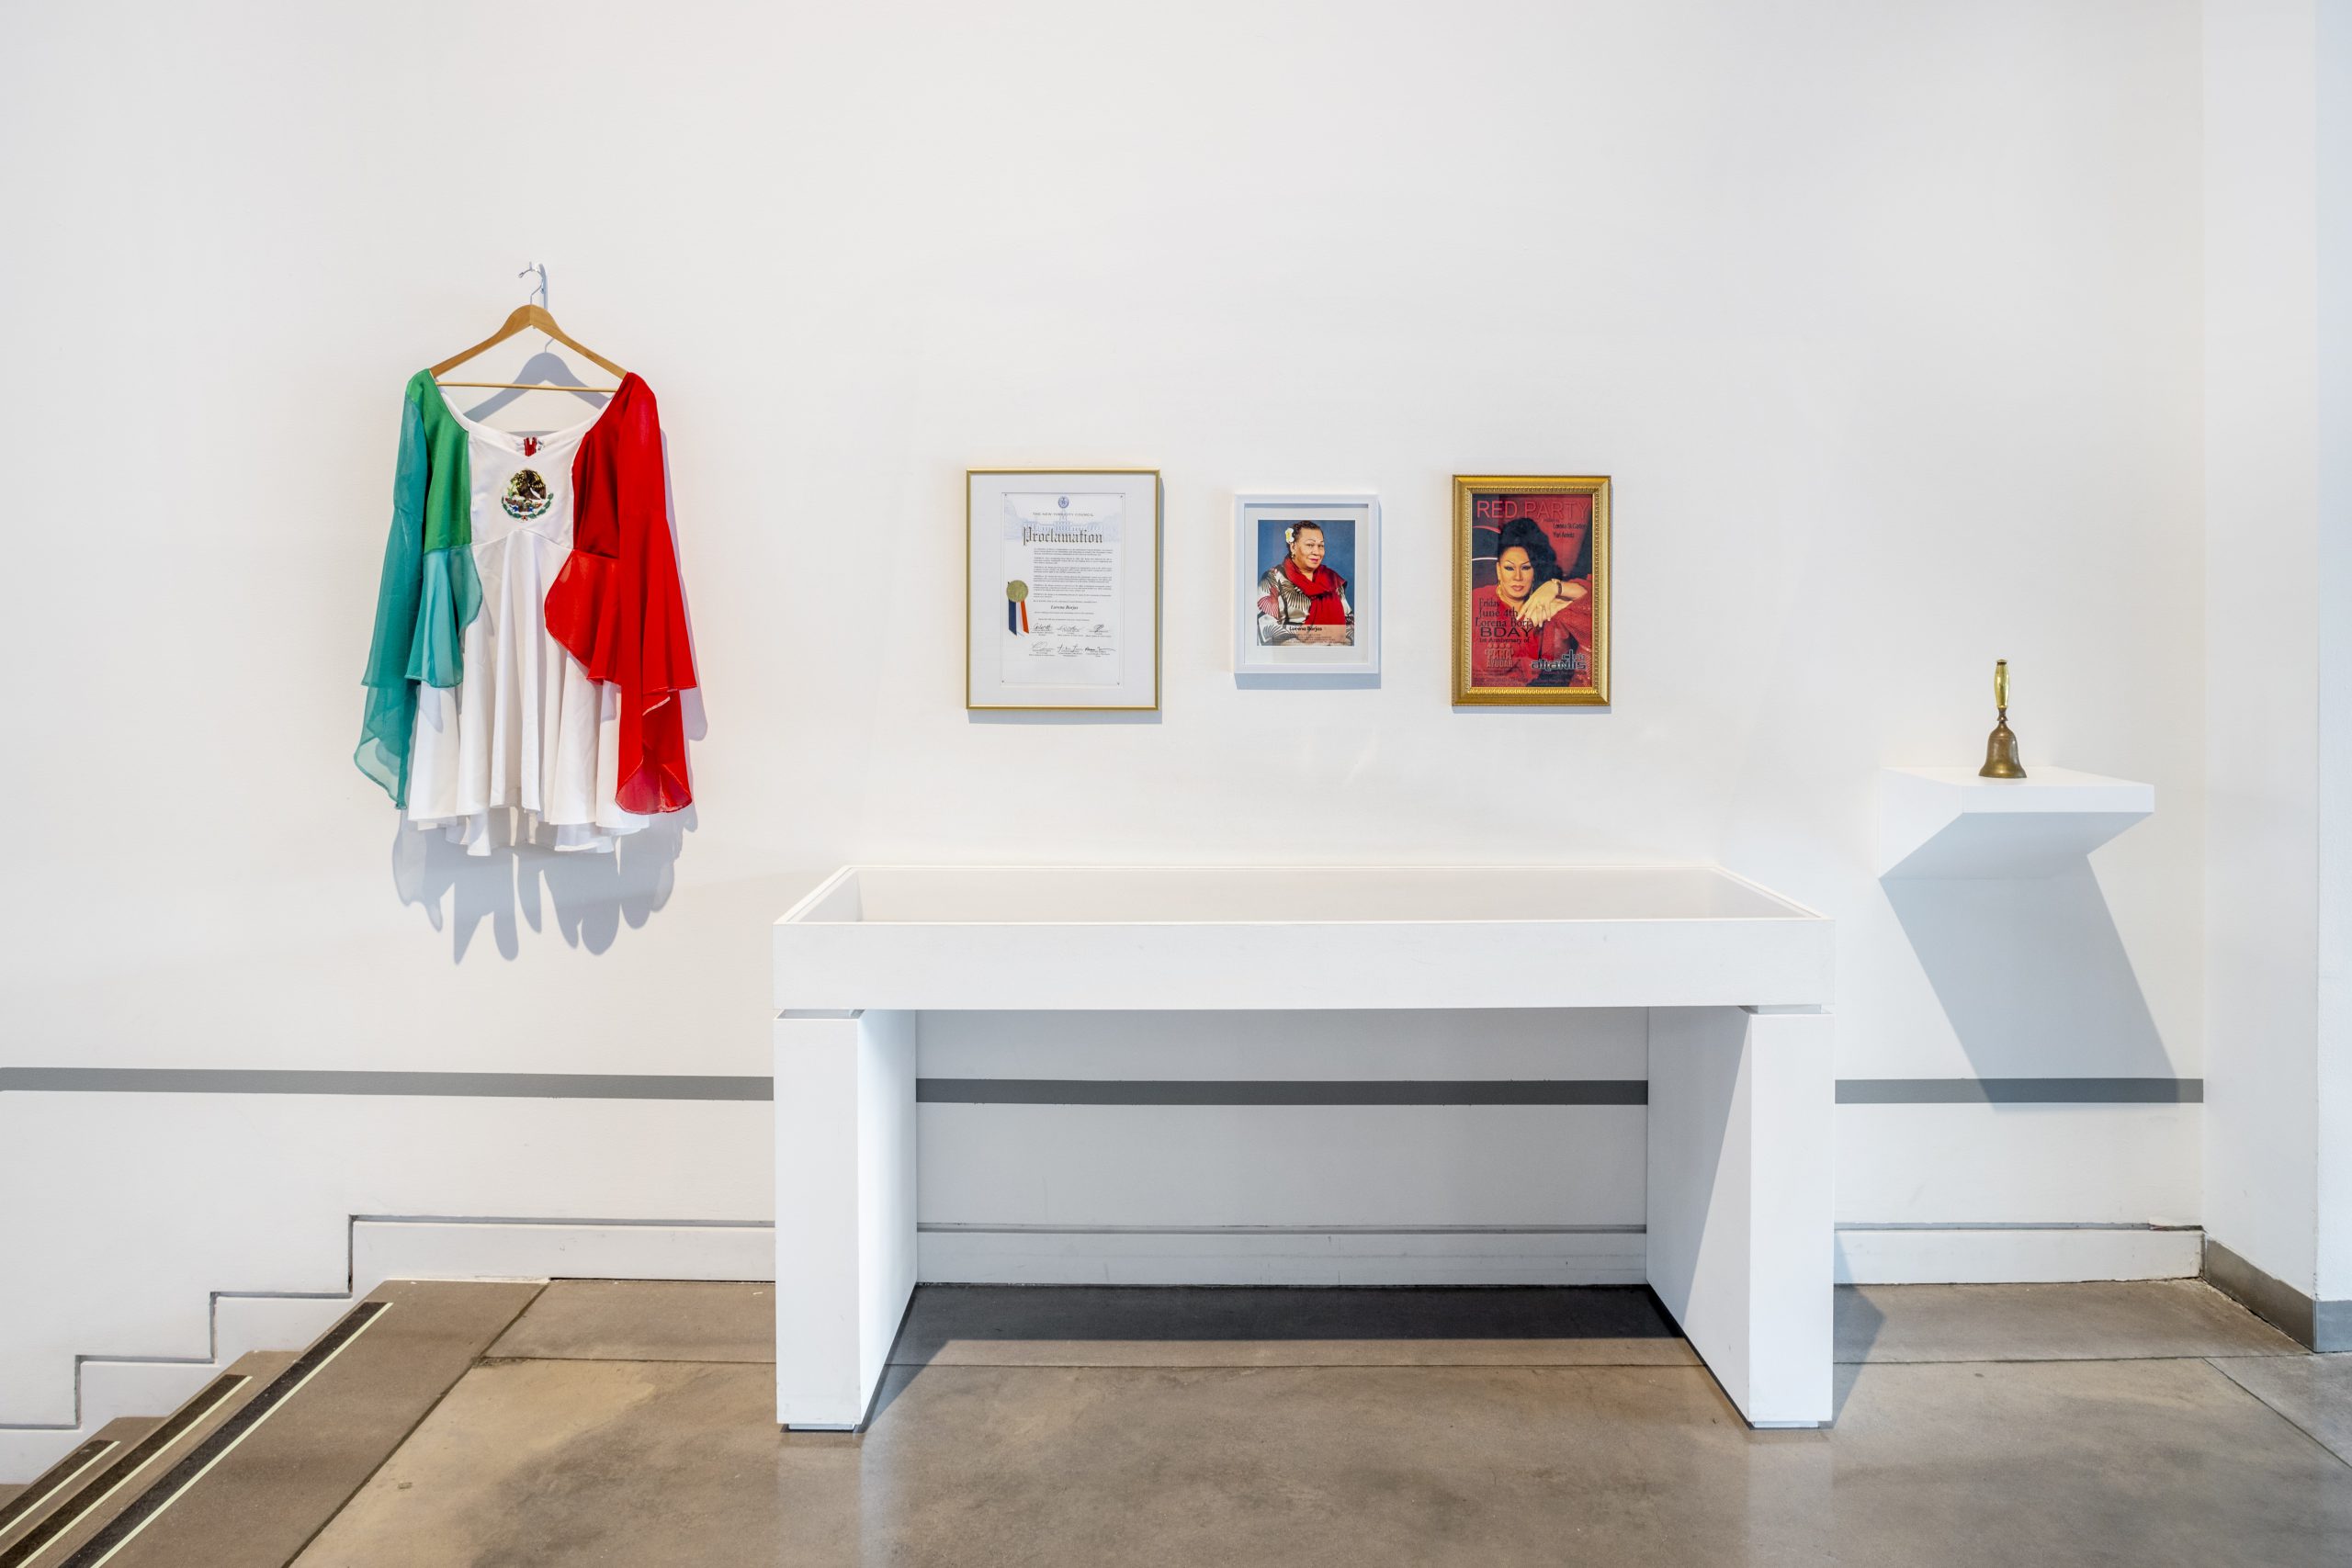 On a white wall hangs a dress with the Mexican flag, framed pictures of Lorena Borjas, and a proclamation from the city to Lorena Borjas. In front of the pictures is a white table vitrine and next to the vitrine is a short shelf with a gold bell on top of it.